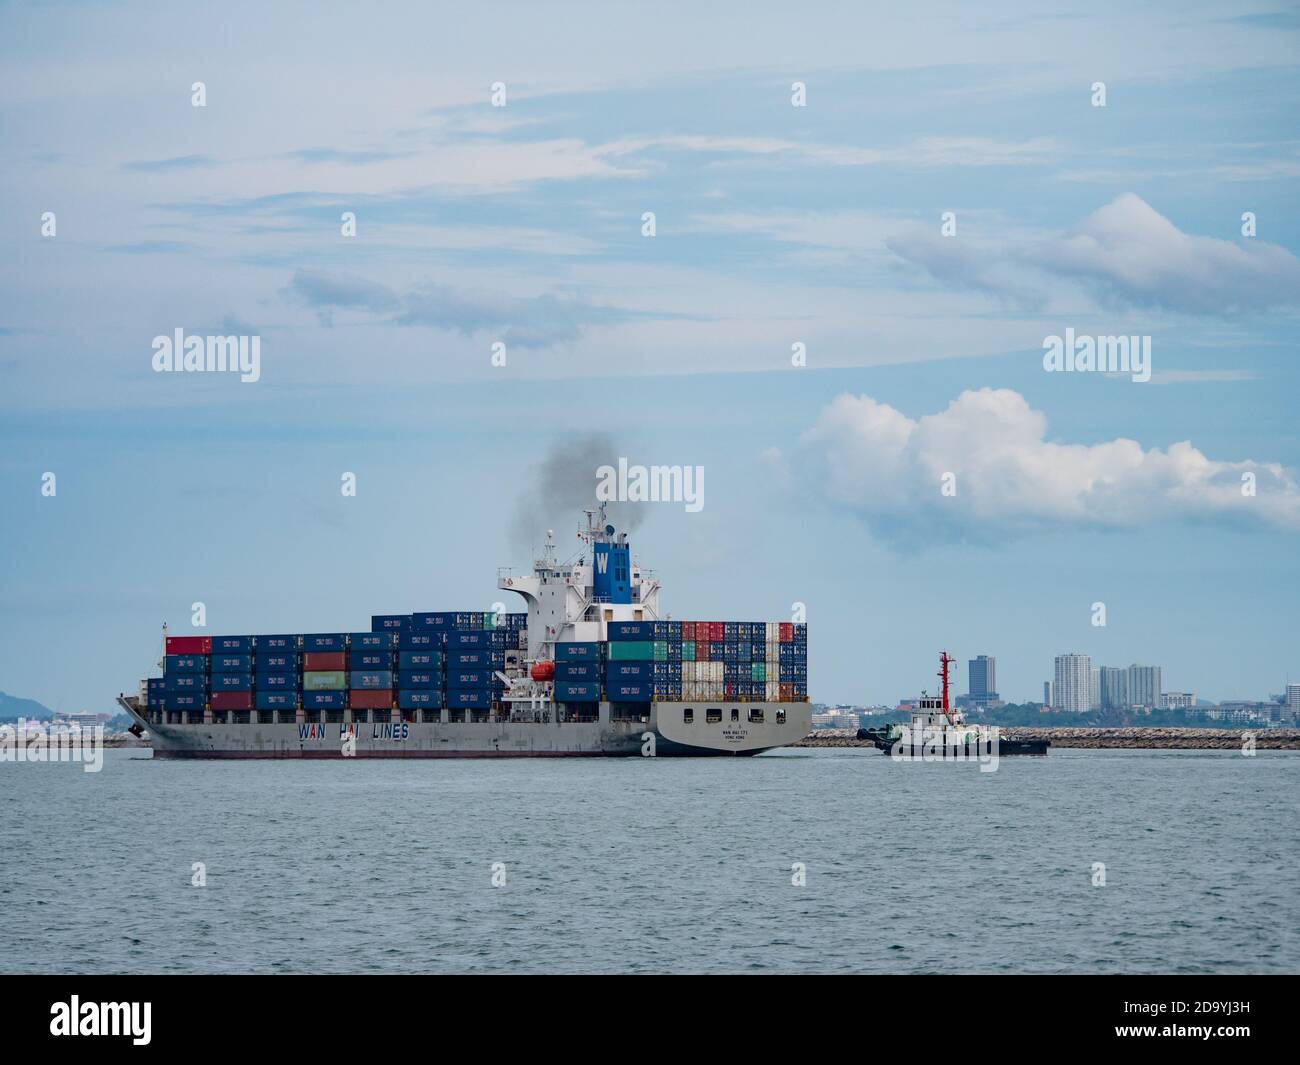 Chinese container ship Wan Hai 171 arrives at the port in Laem Chabang in Thailand. Stock Photo